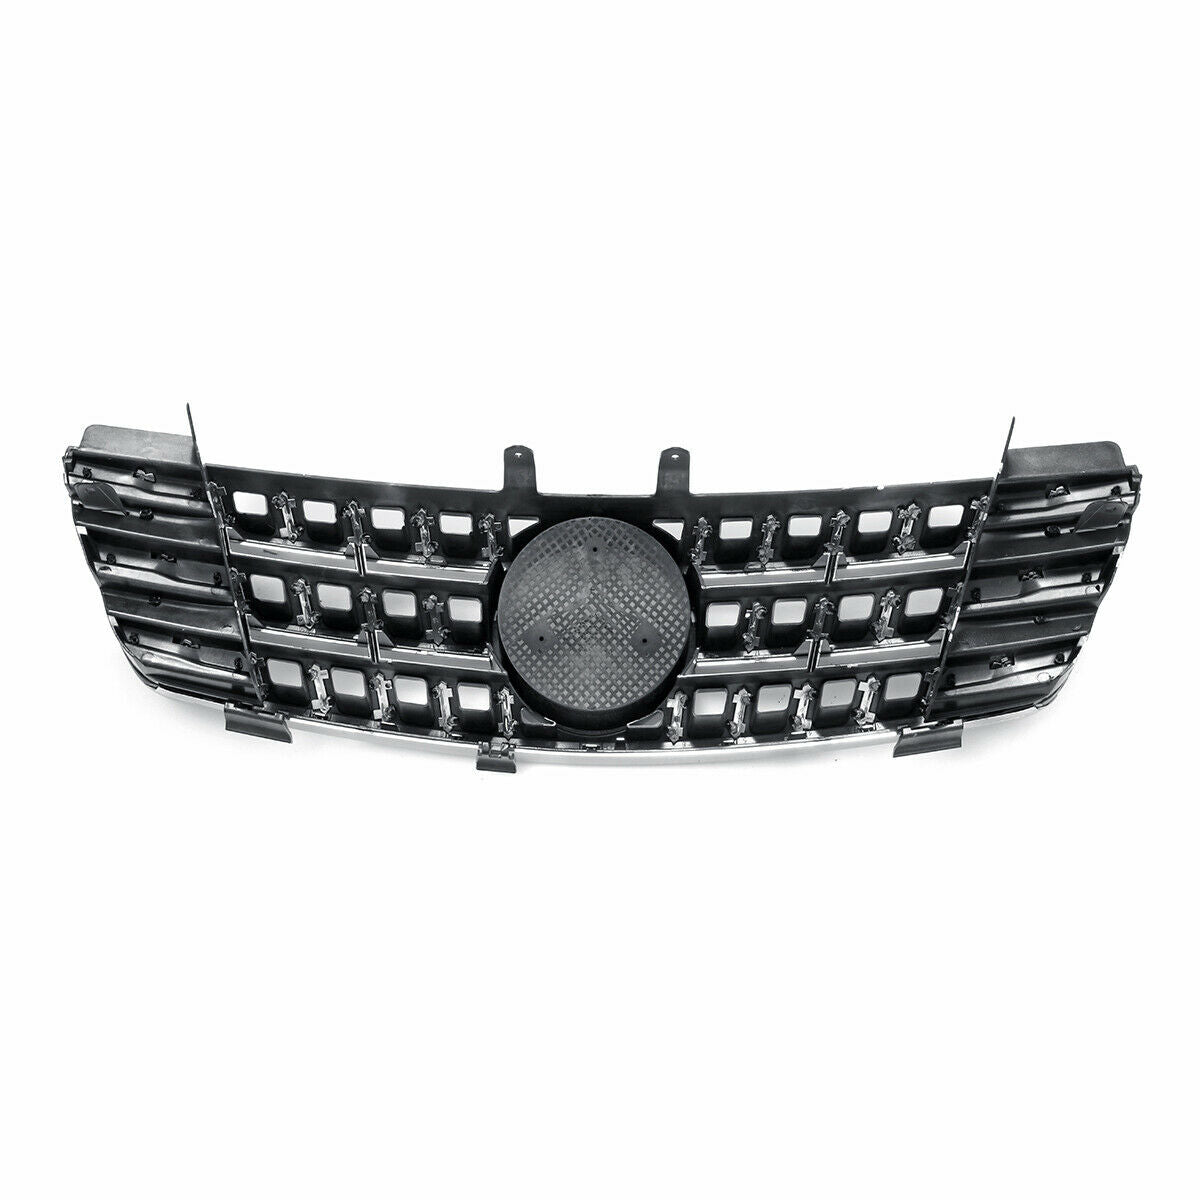 BENZ W164 CHROME 2005 - 2008 FRONT GRILLE 